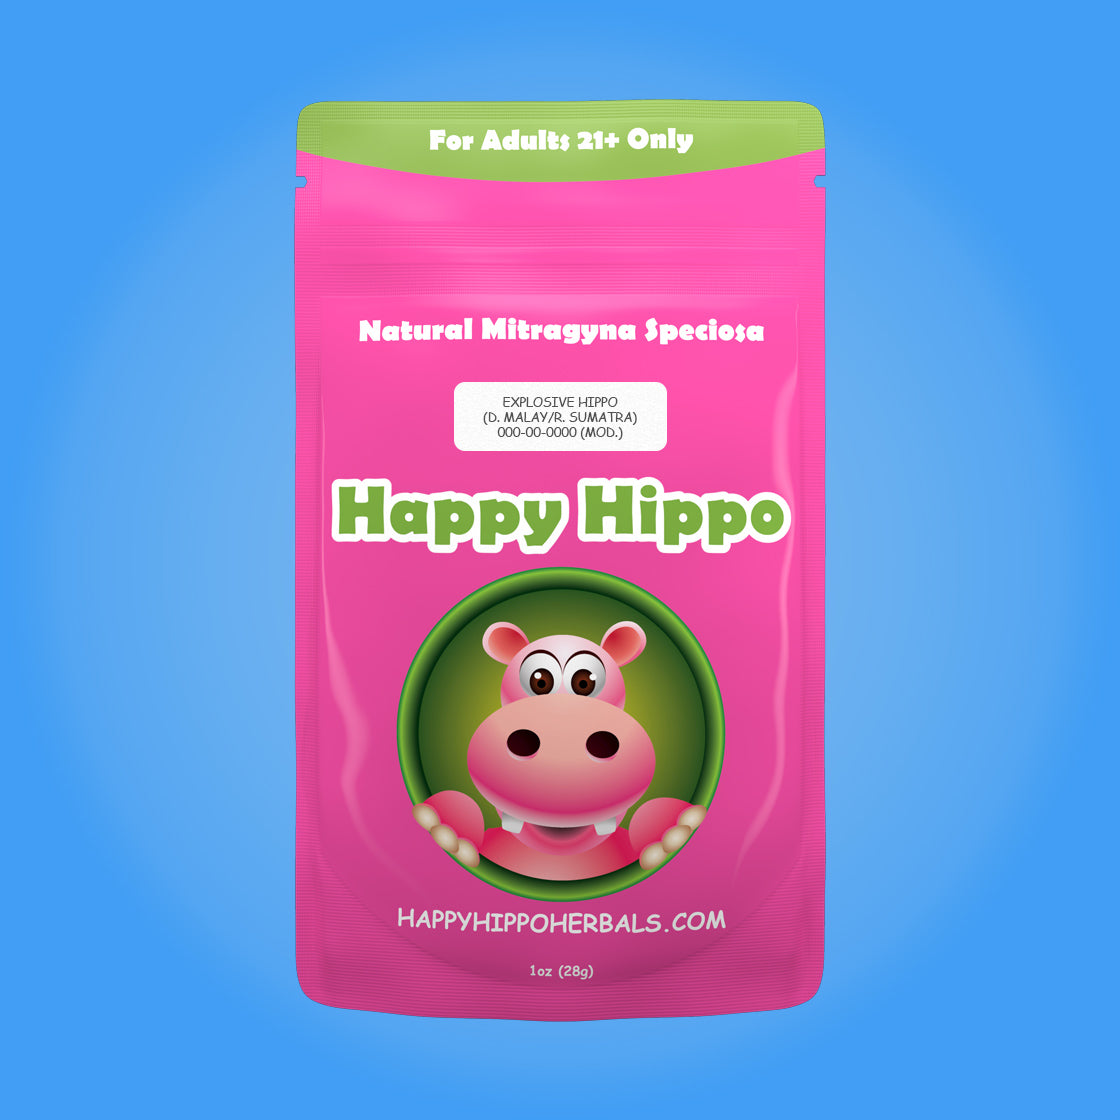 Product Image depicting a 1oz bag of Happy Hippo Blended Malay and Red Vein Sumatra Kratom Powder (Mitragyna Speciosa).